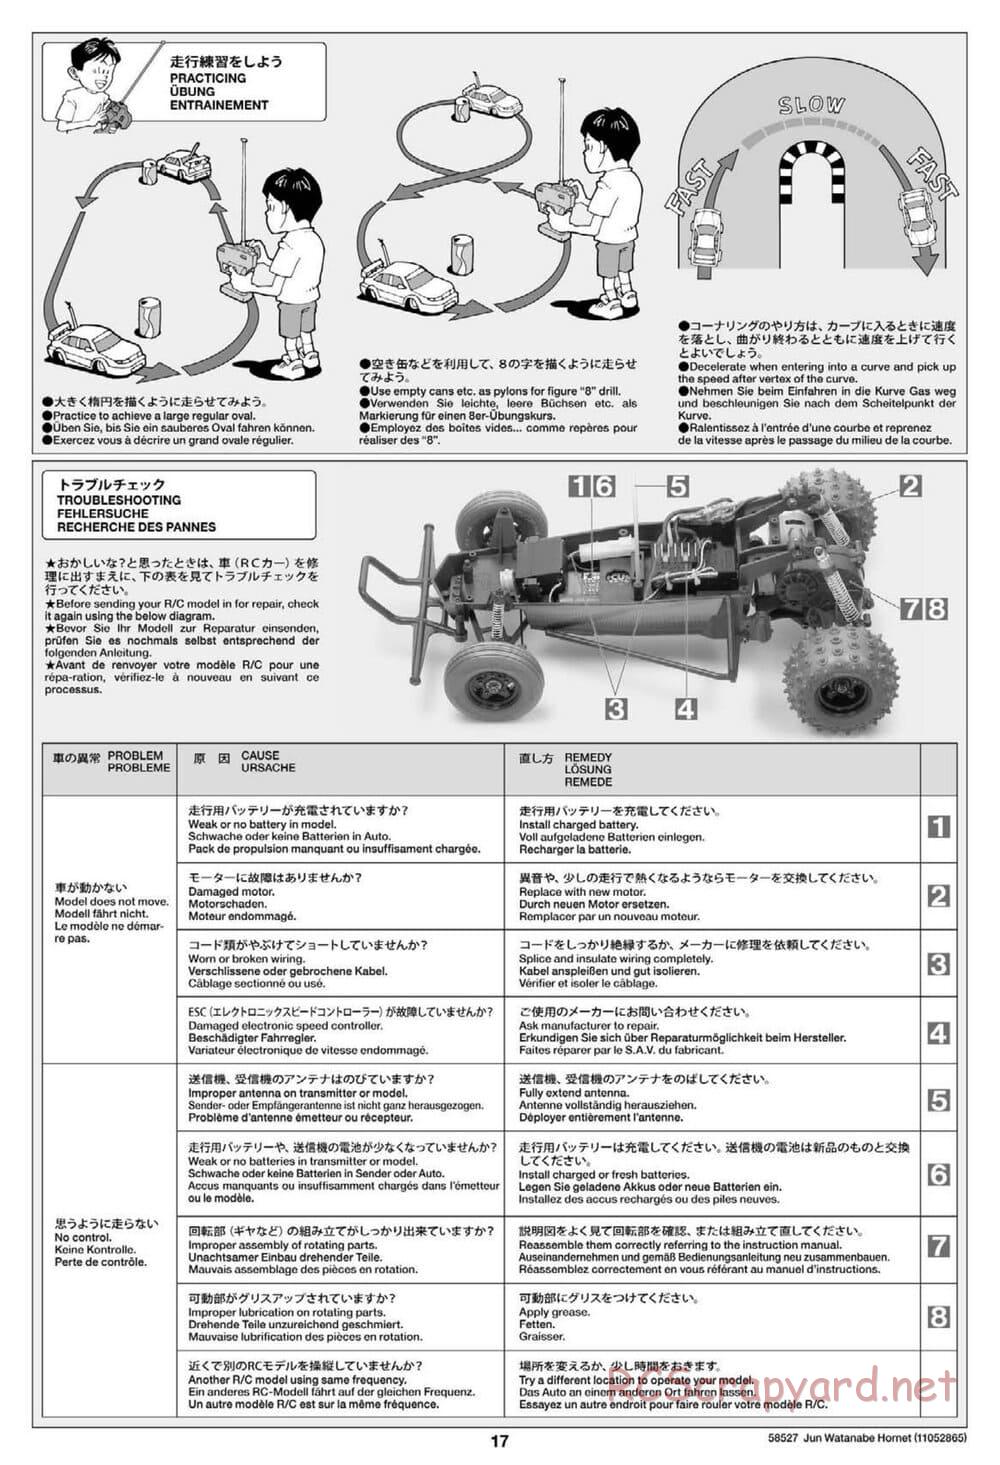 Tamiya - The Hornet by Jun Watanabe - GH Chassis - Manual - Page 17